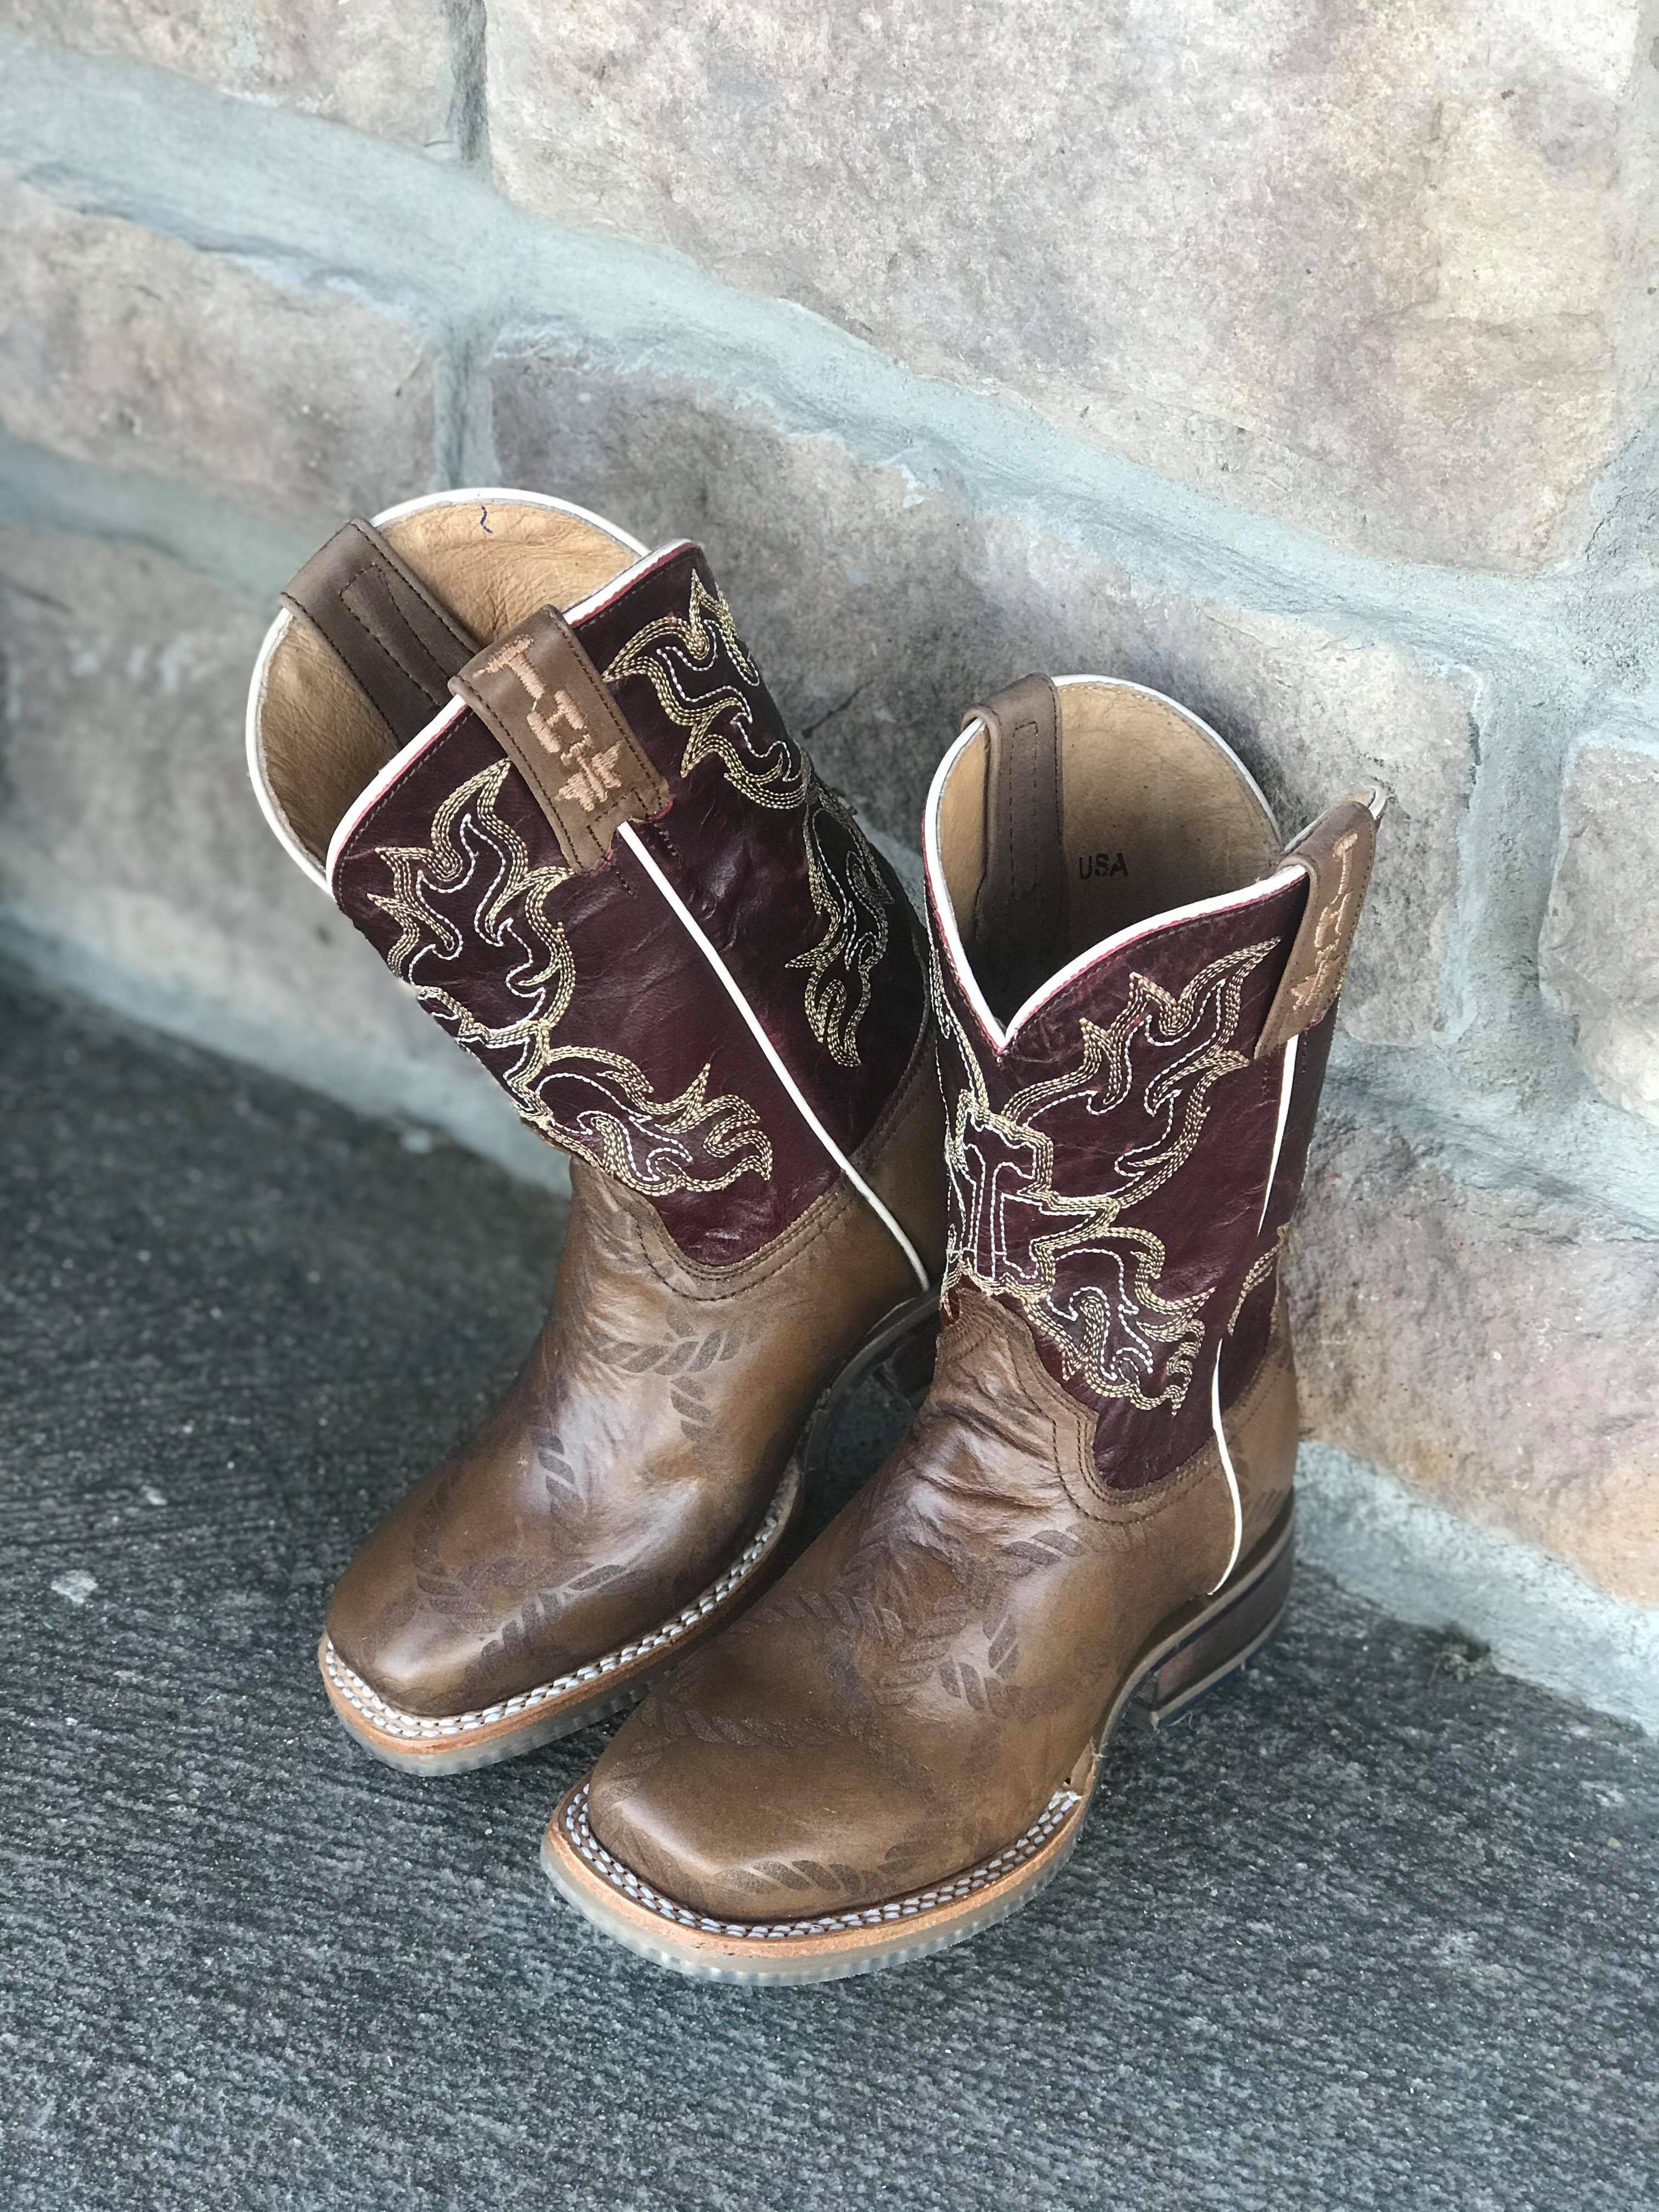 Kid's Just Rope It Tin Haul Boots-Kids Boots-Tin Haul-Lucky J Boots & More, Women's, Men's, & Kids Western Store Located in Carthage, MO